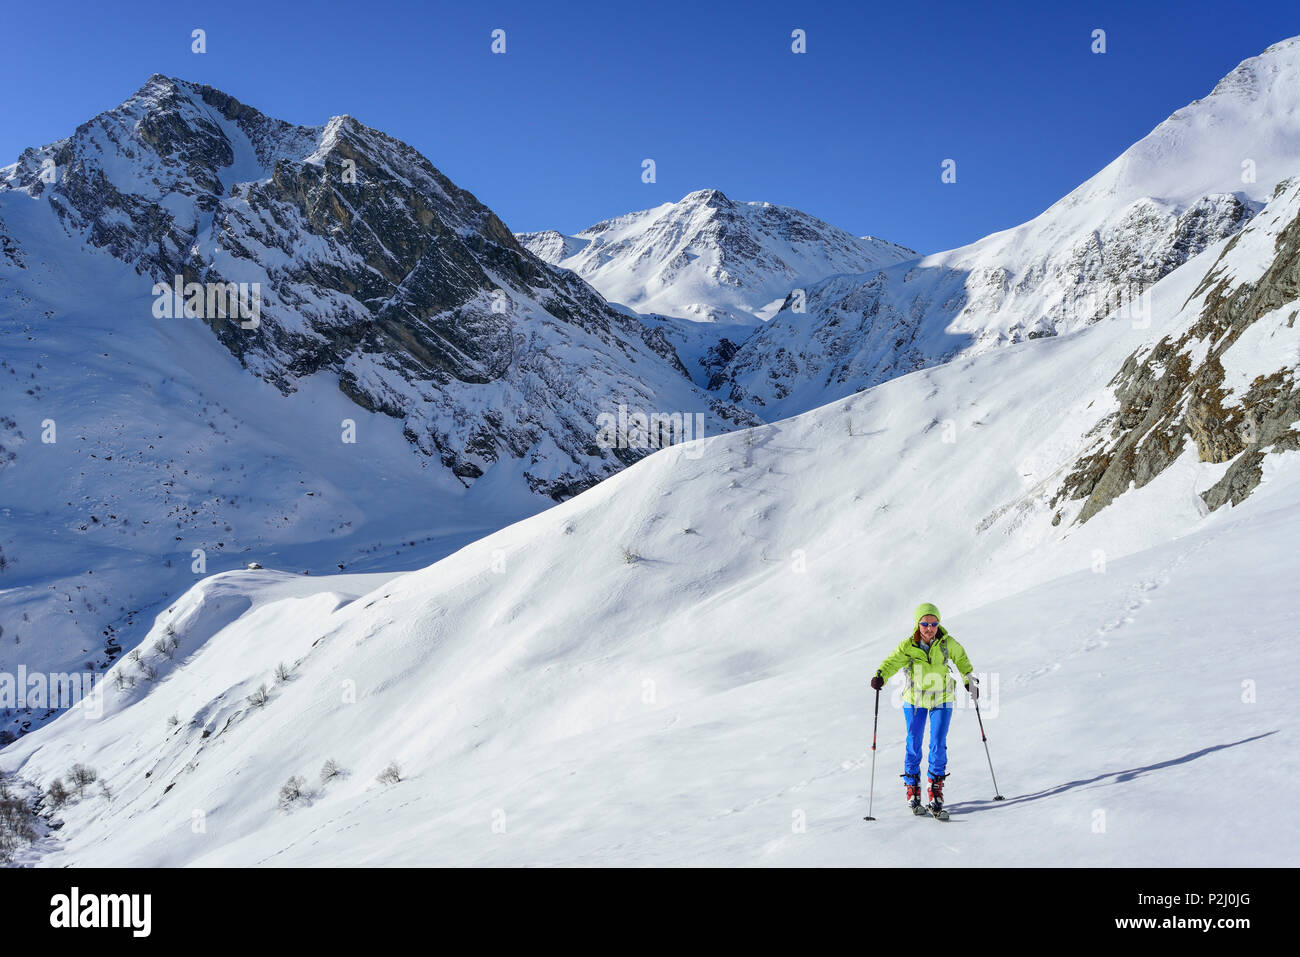 Woman back-country skiing ascending towards Monte Salza, in background Monte Pence and Buc Faraut, Monte Salza, Valle Varaita, C Stock Photo